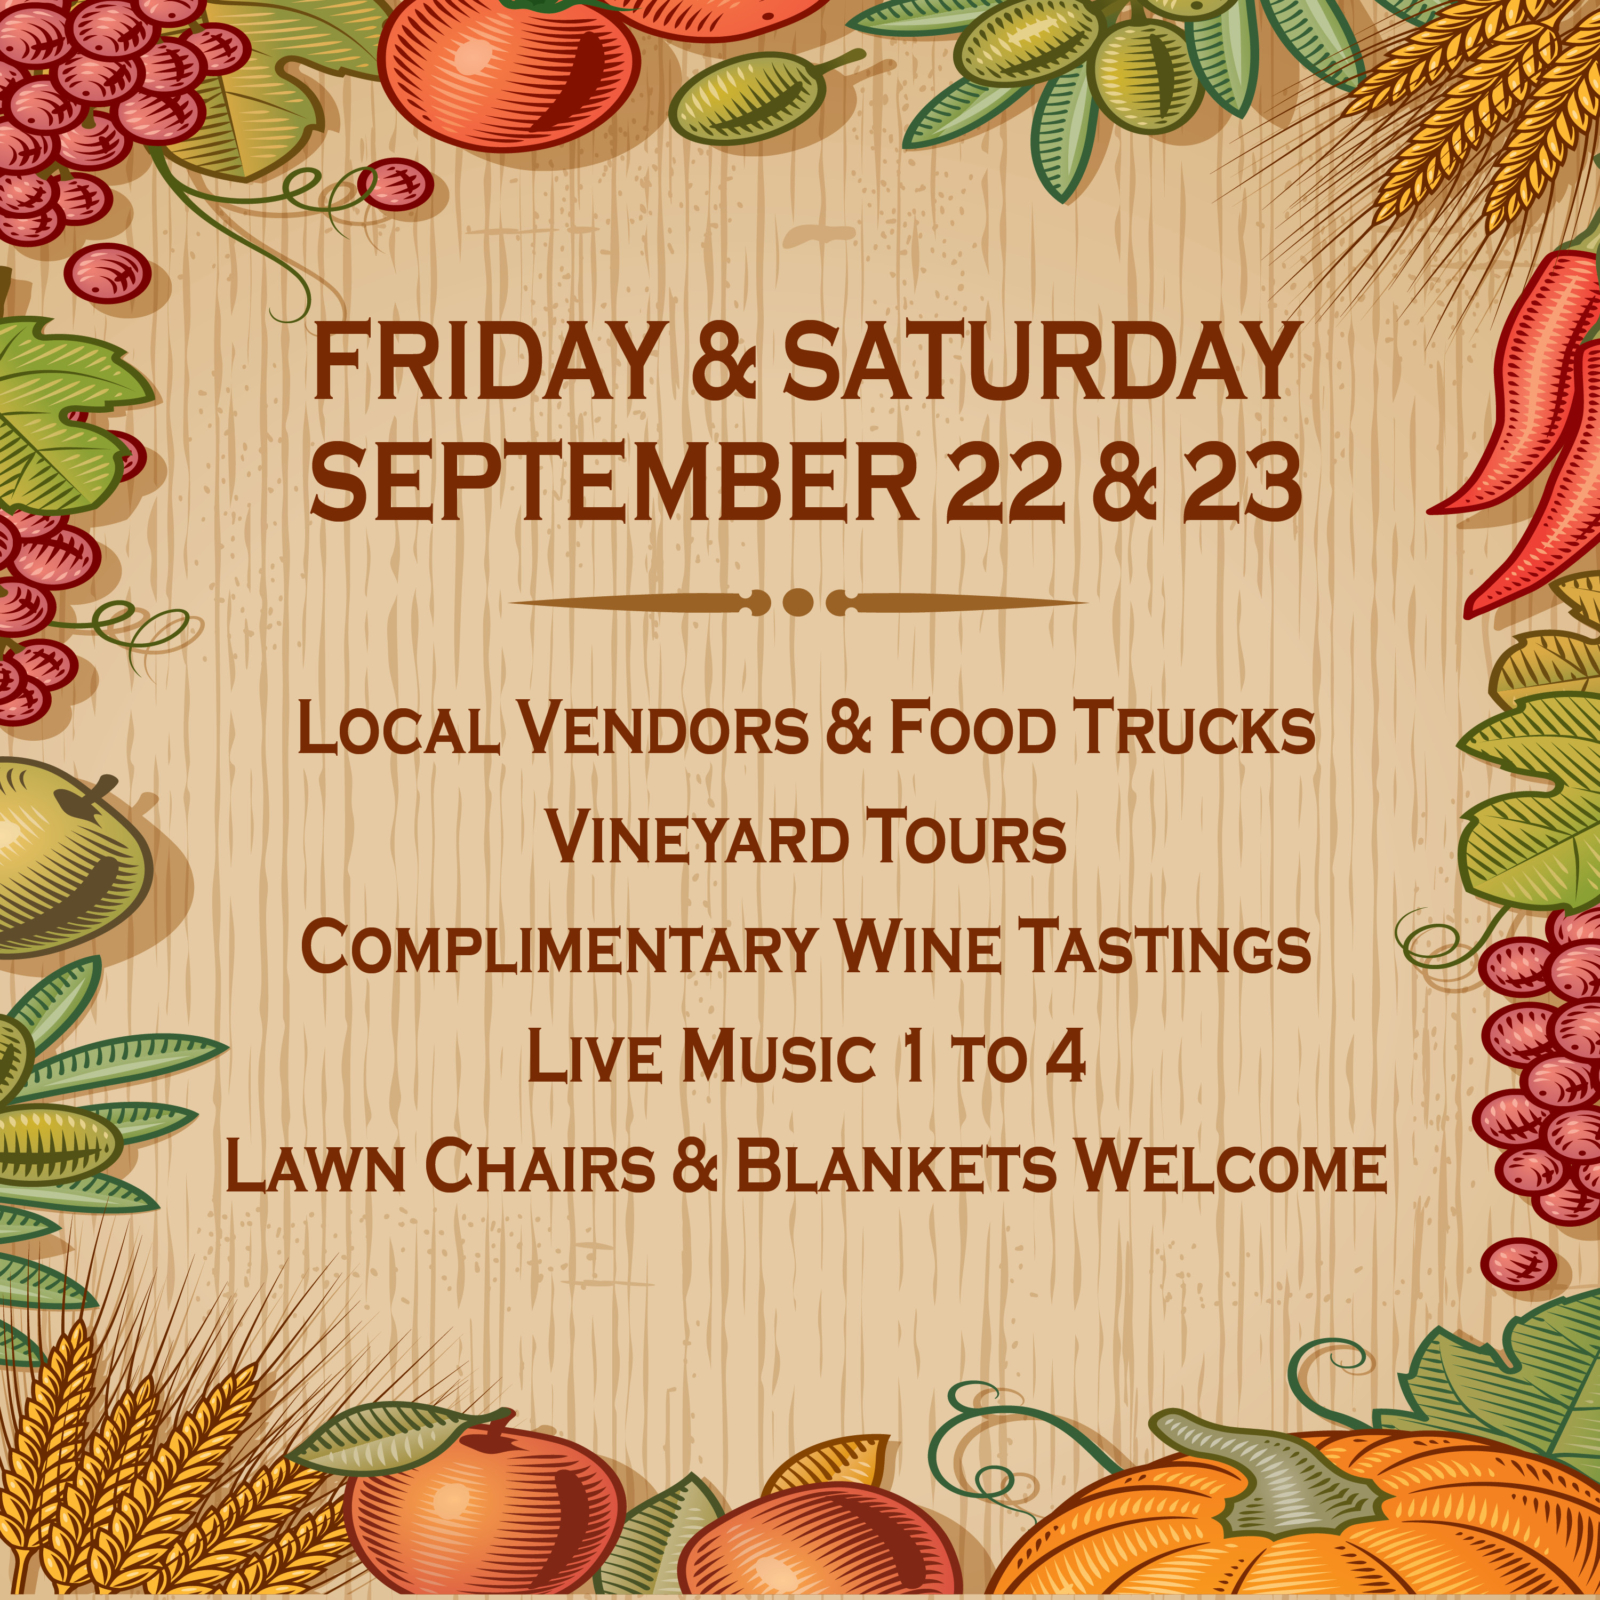 Friday & Saturday, September 22 & 23: Local vendors & food trucks, vineyard tours, complimentary wine tastings, live music 1 to 4, lawn chairs & blankets welcome